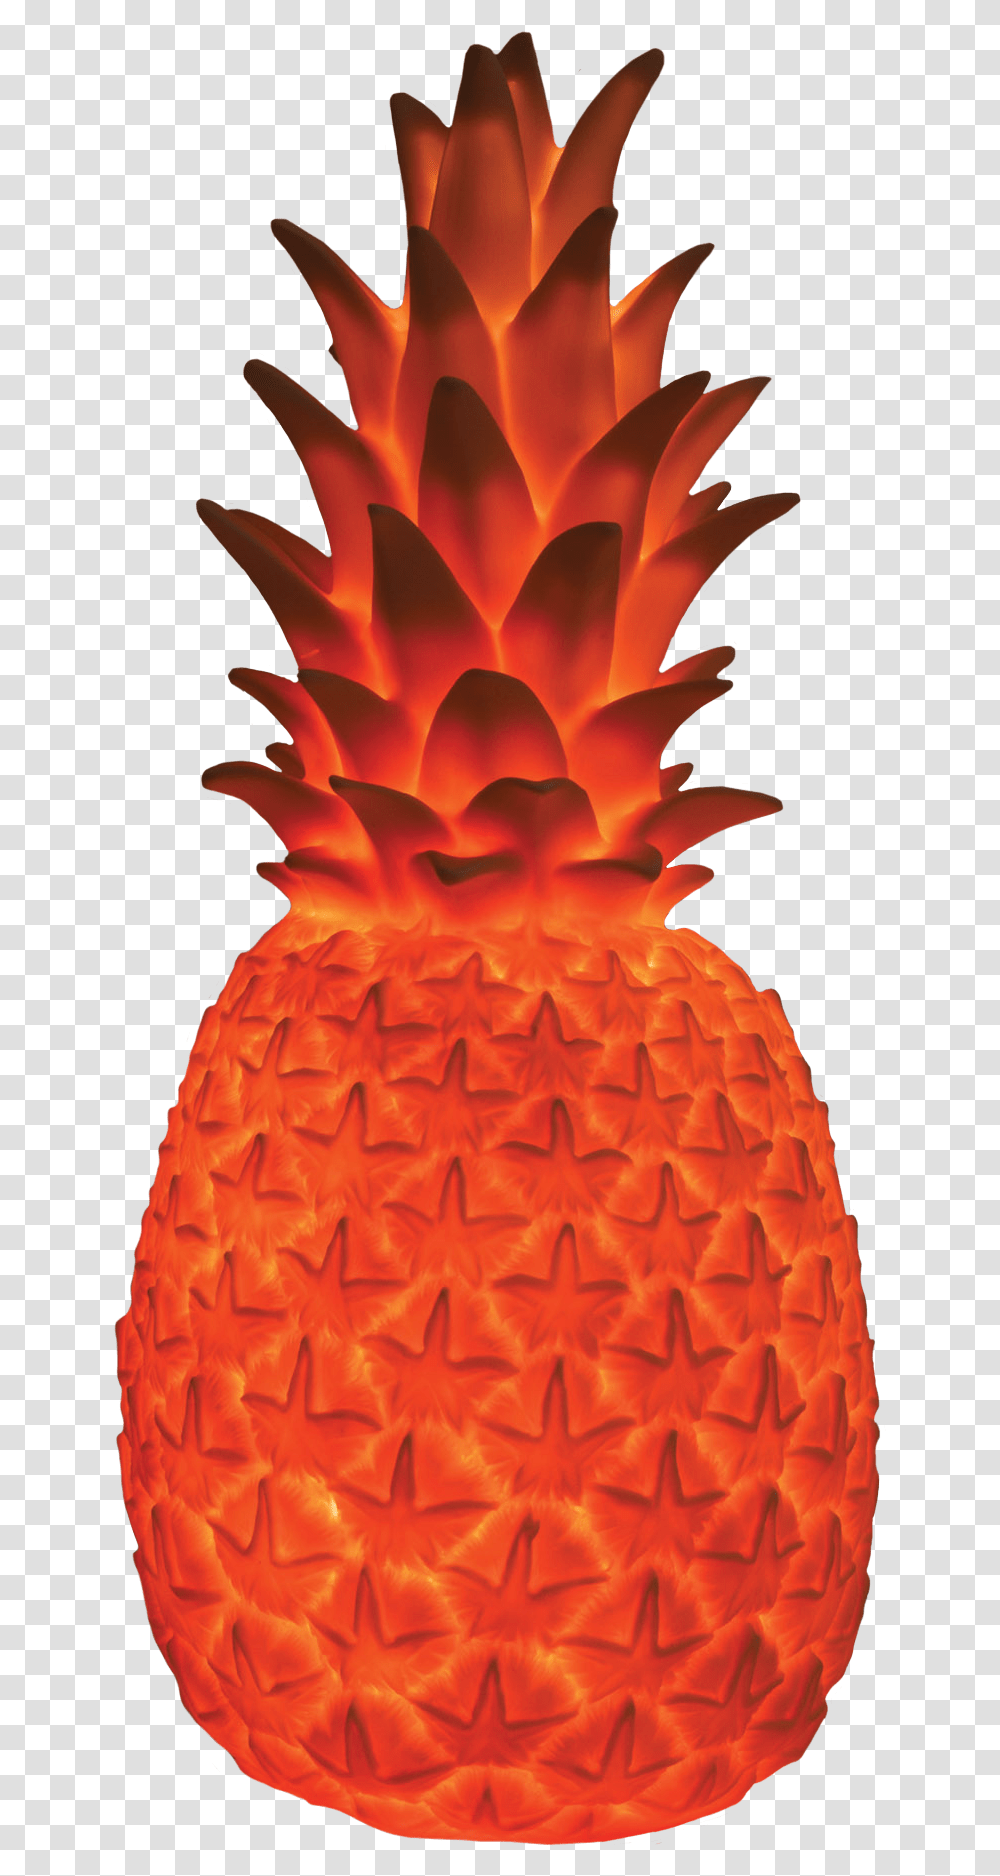 Goodnight Pineapple Pineapple Cartoon Red Pineapple, Fruit, Plant, Food, Fire Transparent Png